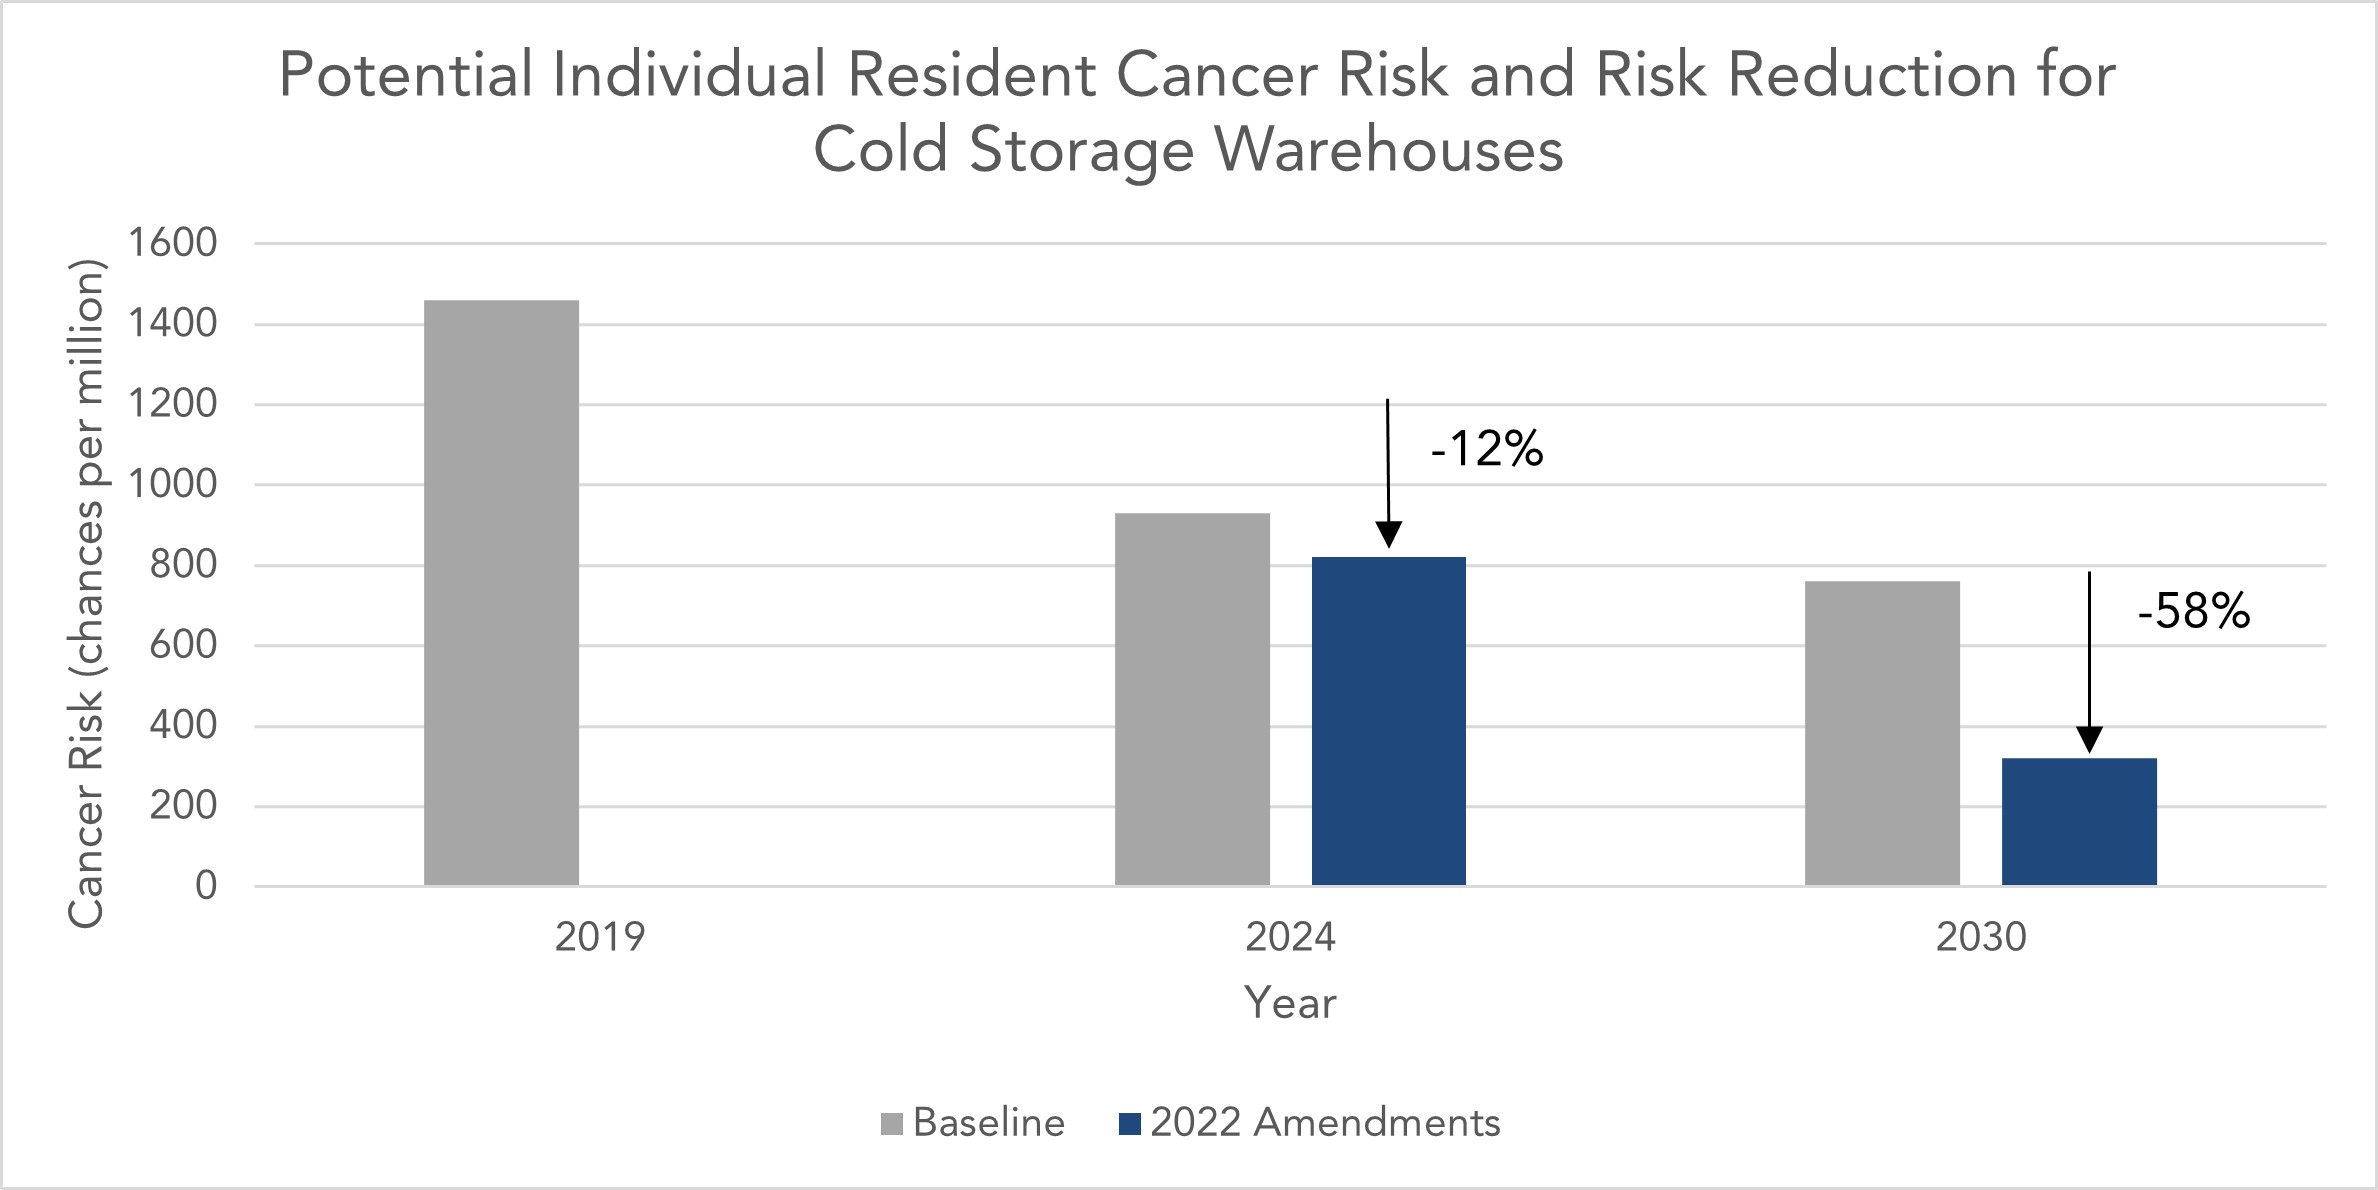 Graph showing potential individual resident cancer risk and risk reduction for cold storage warehouses.